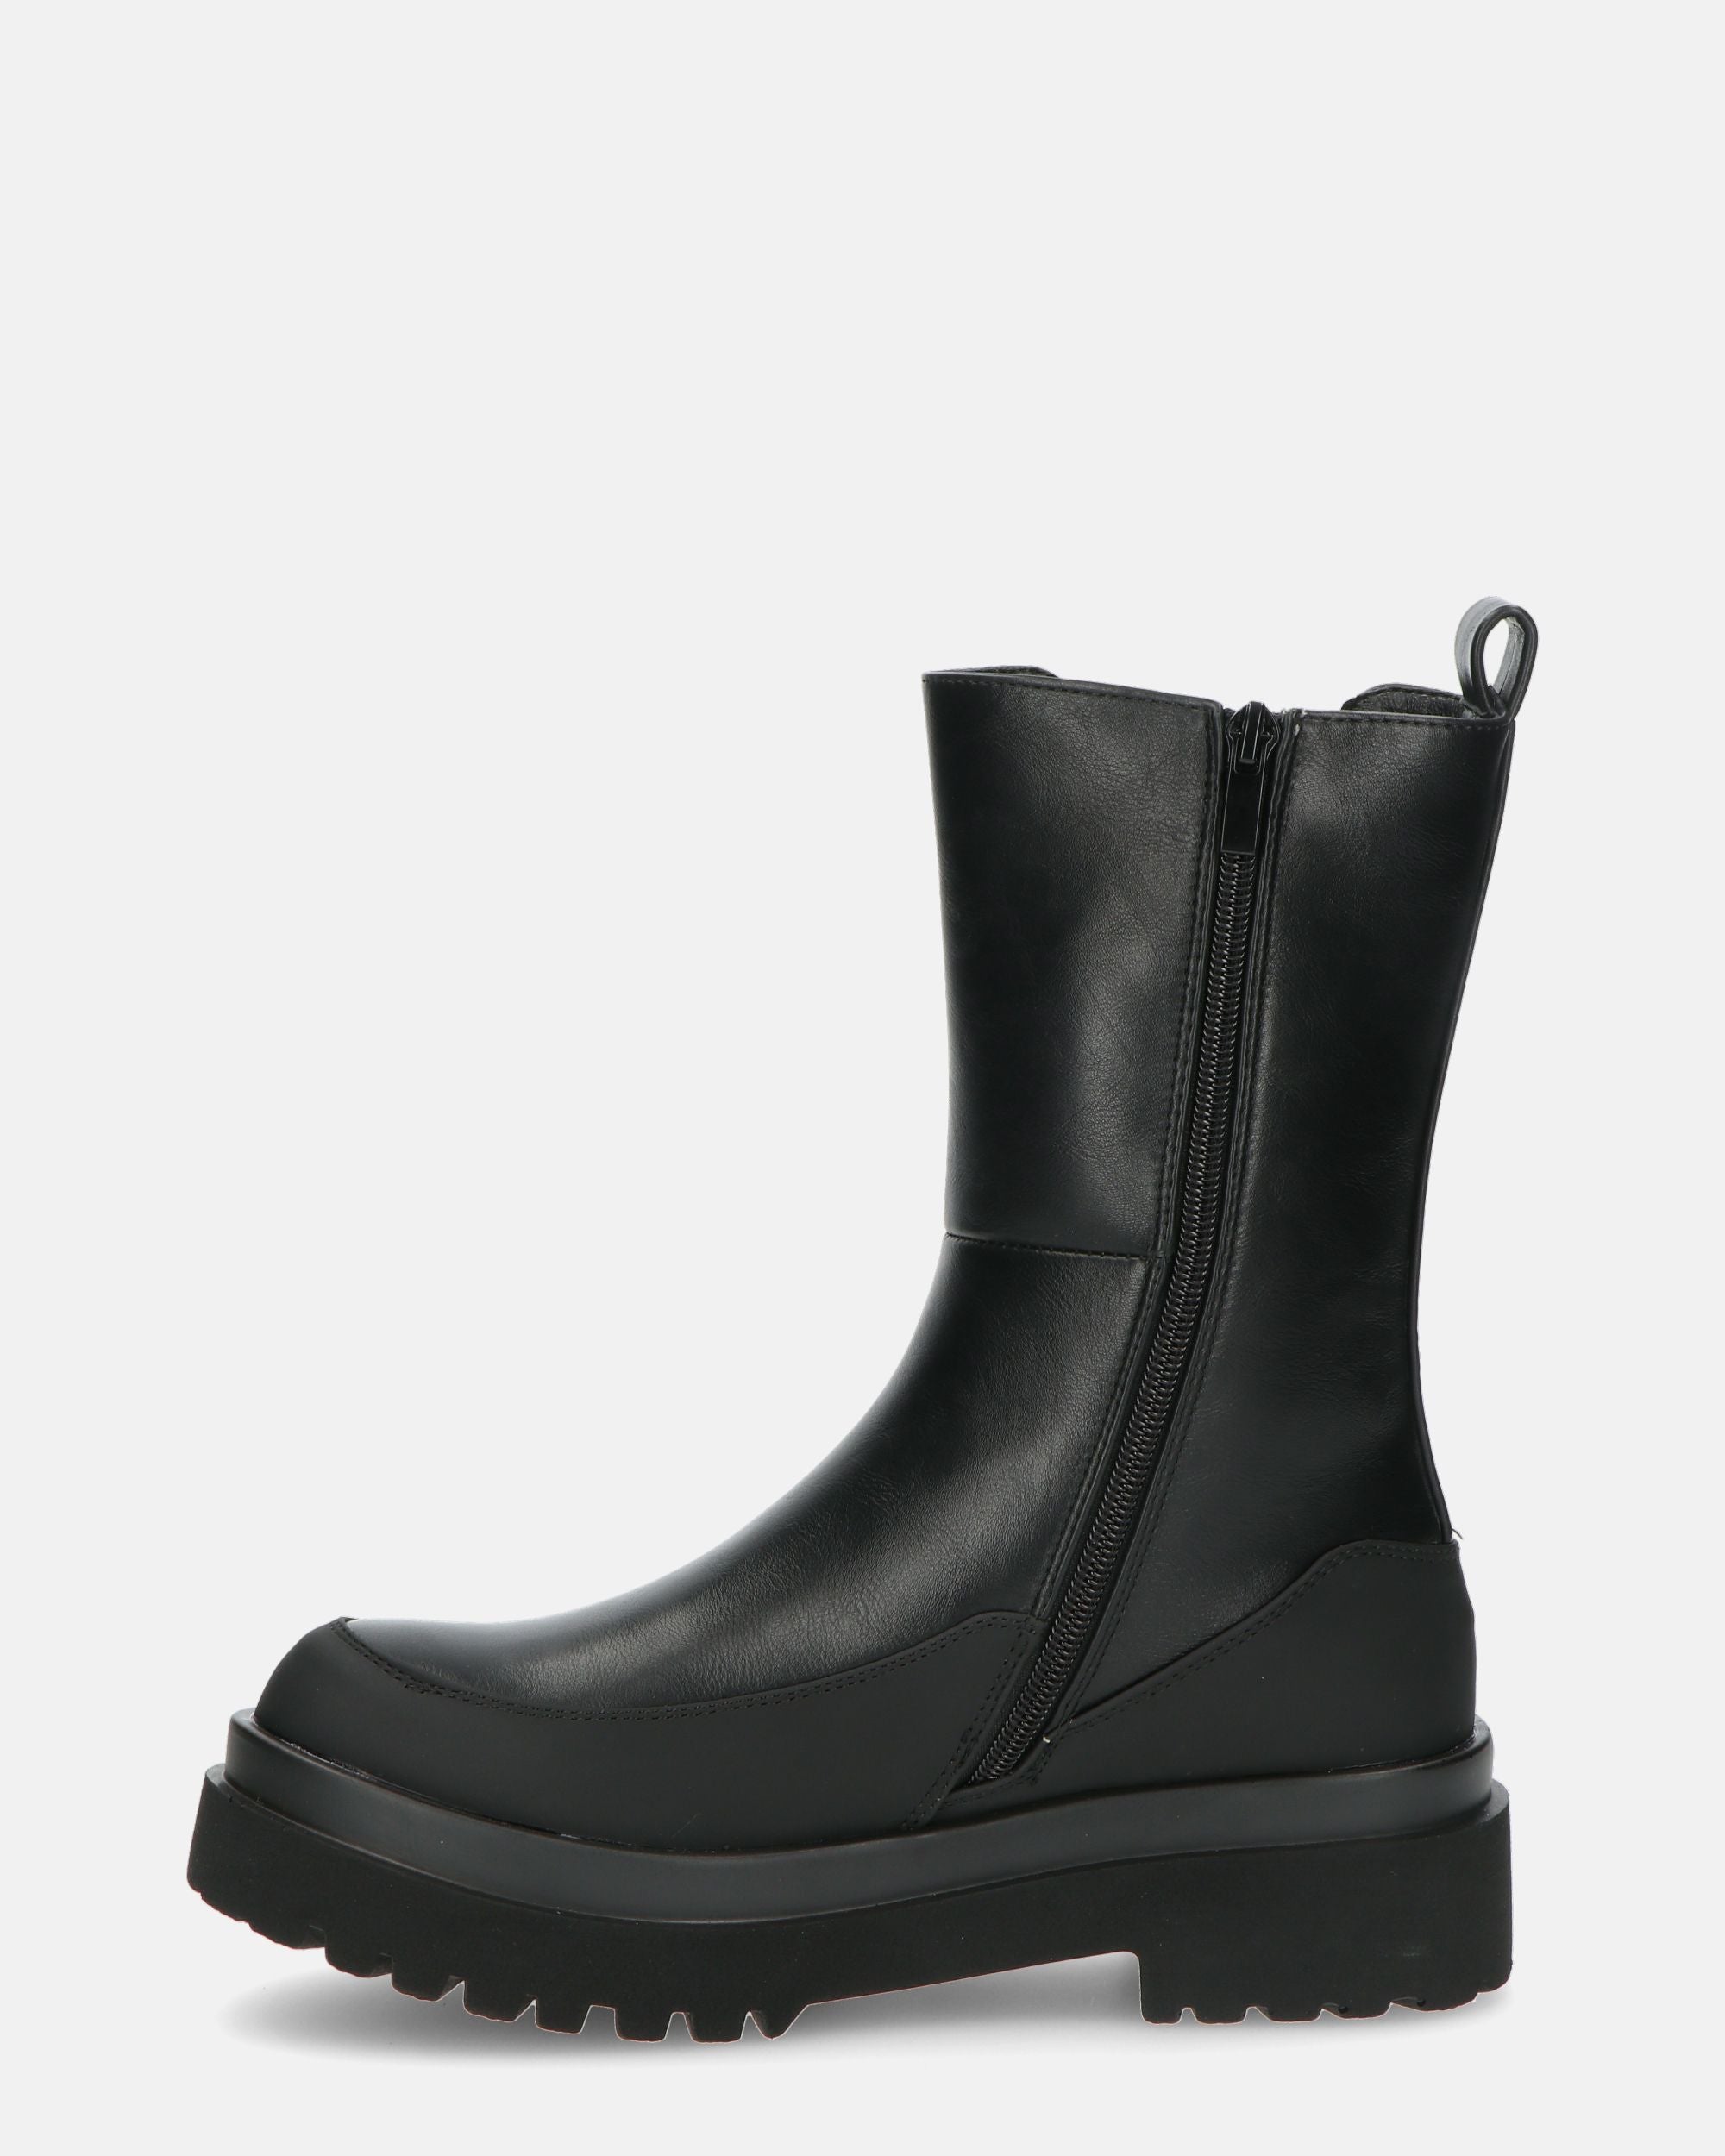 AGATA - black eco-leather ankle boot with elastic fabric and side zip